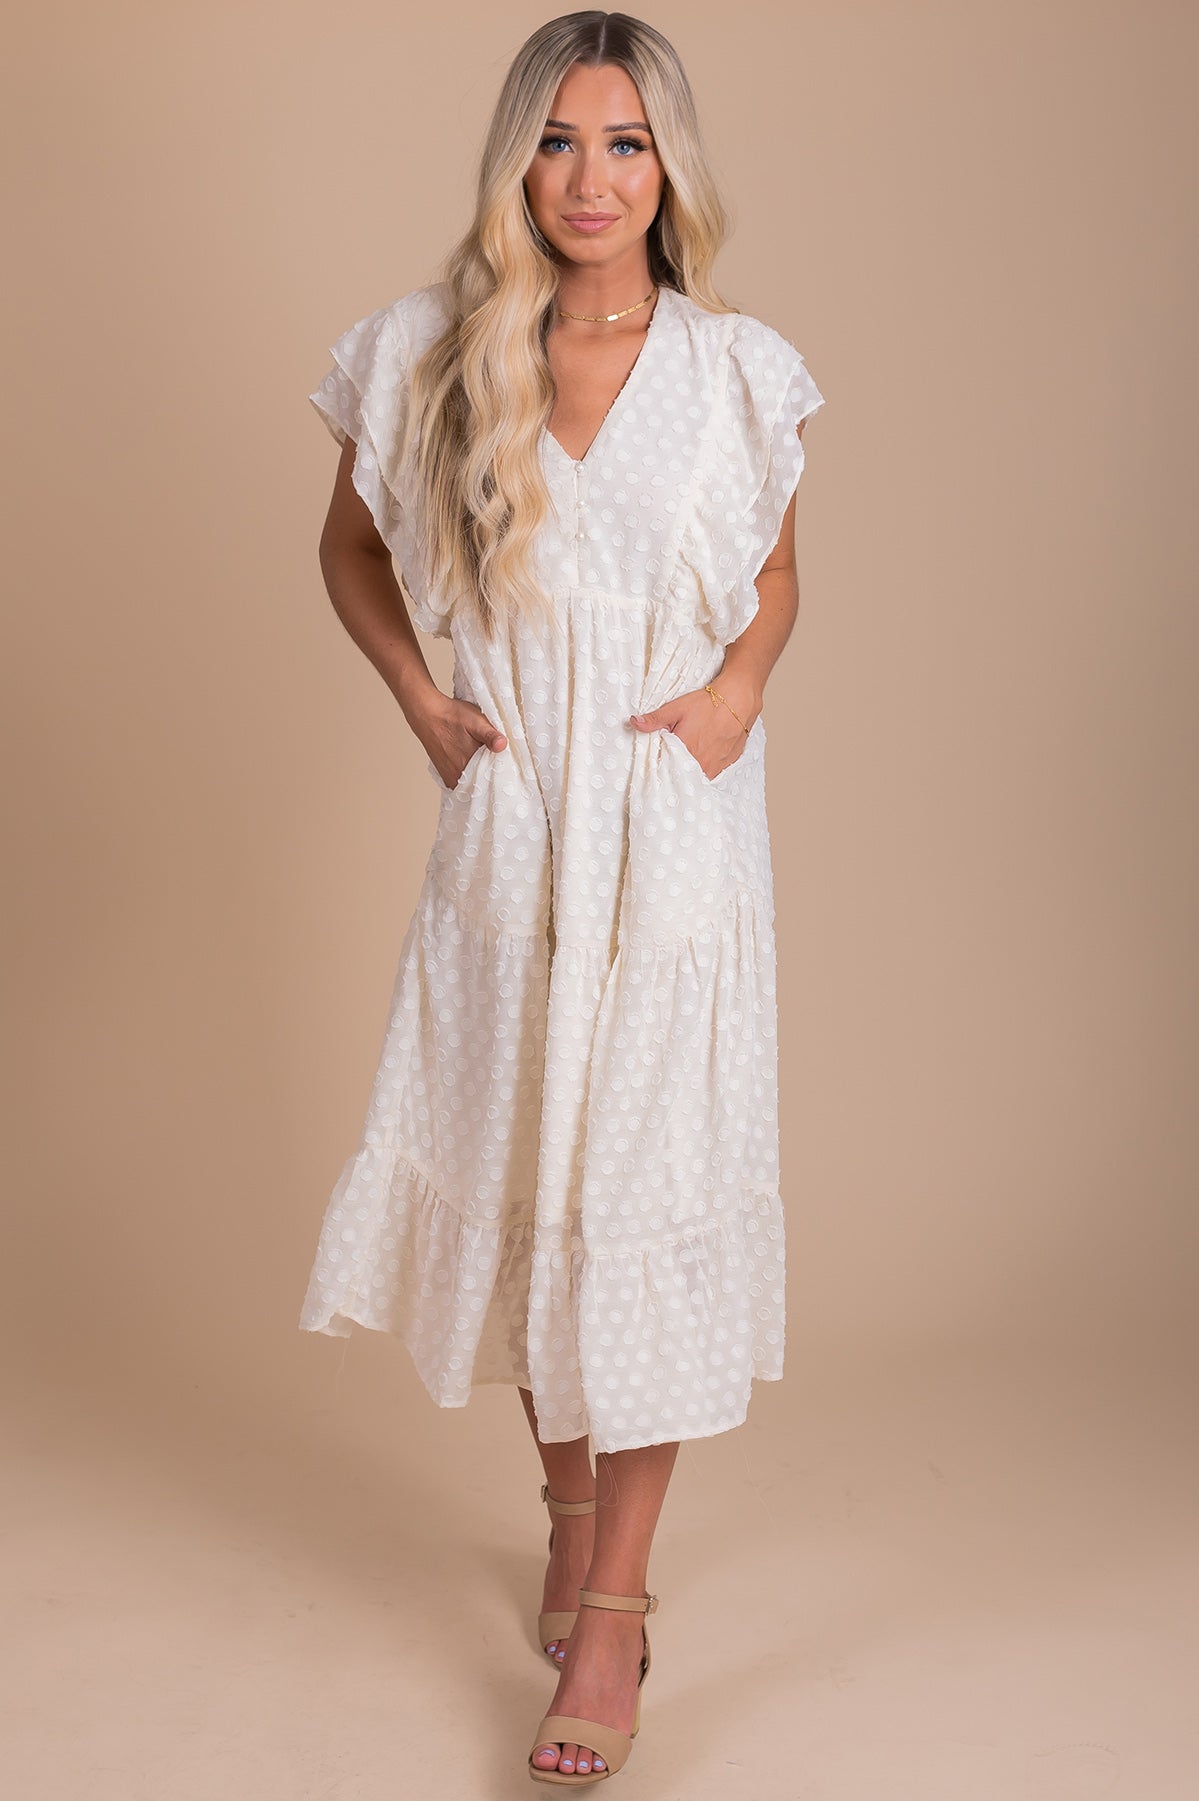 White Midi Dress with Pockets for Women